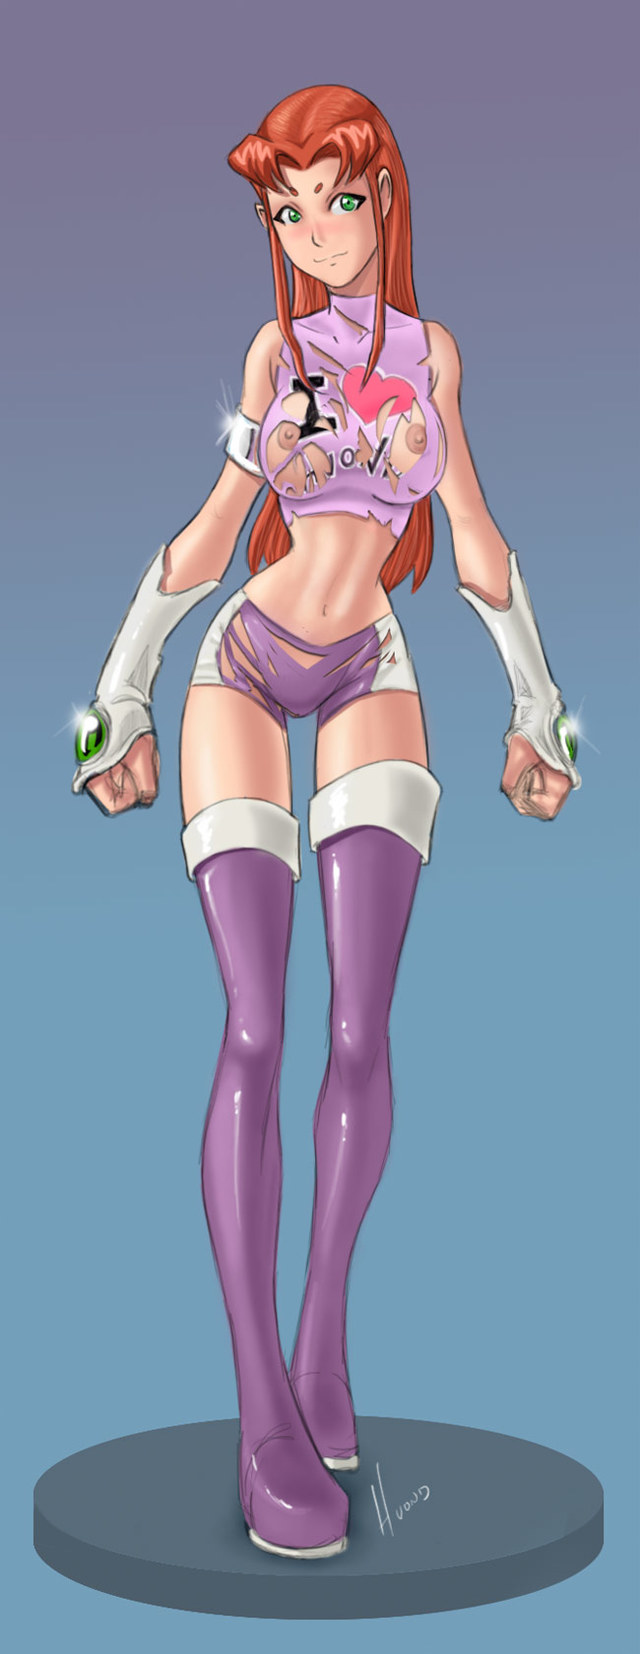 star fire hentai parody all page pictures user starfire hvond